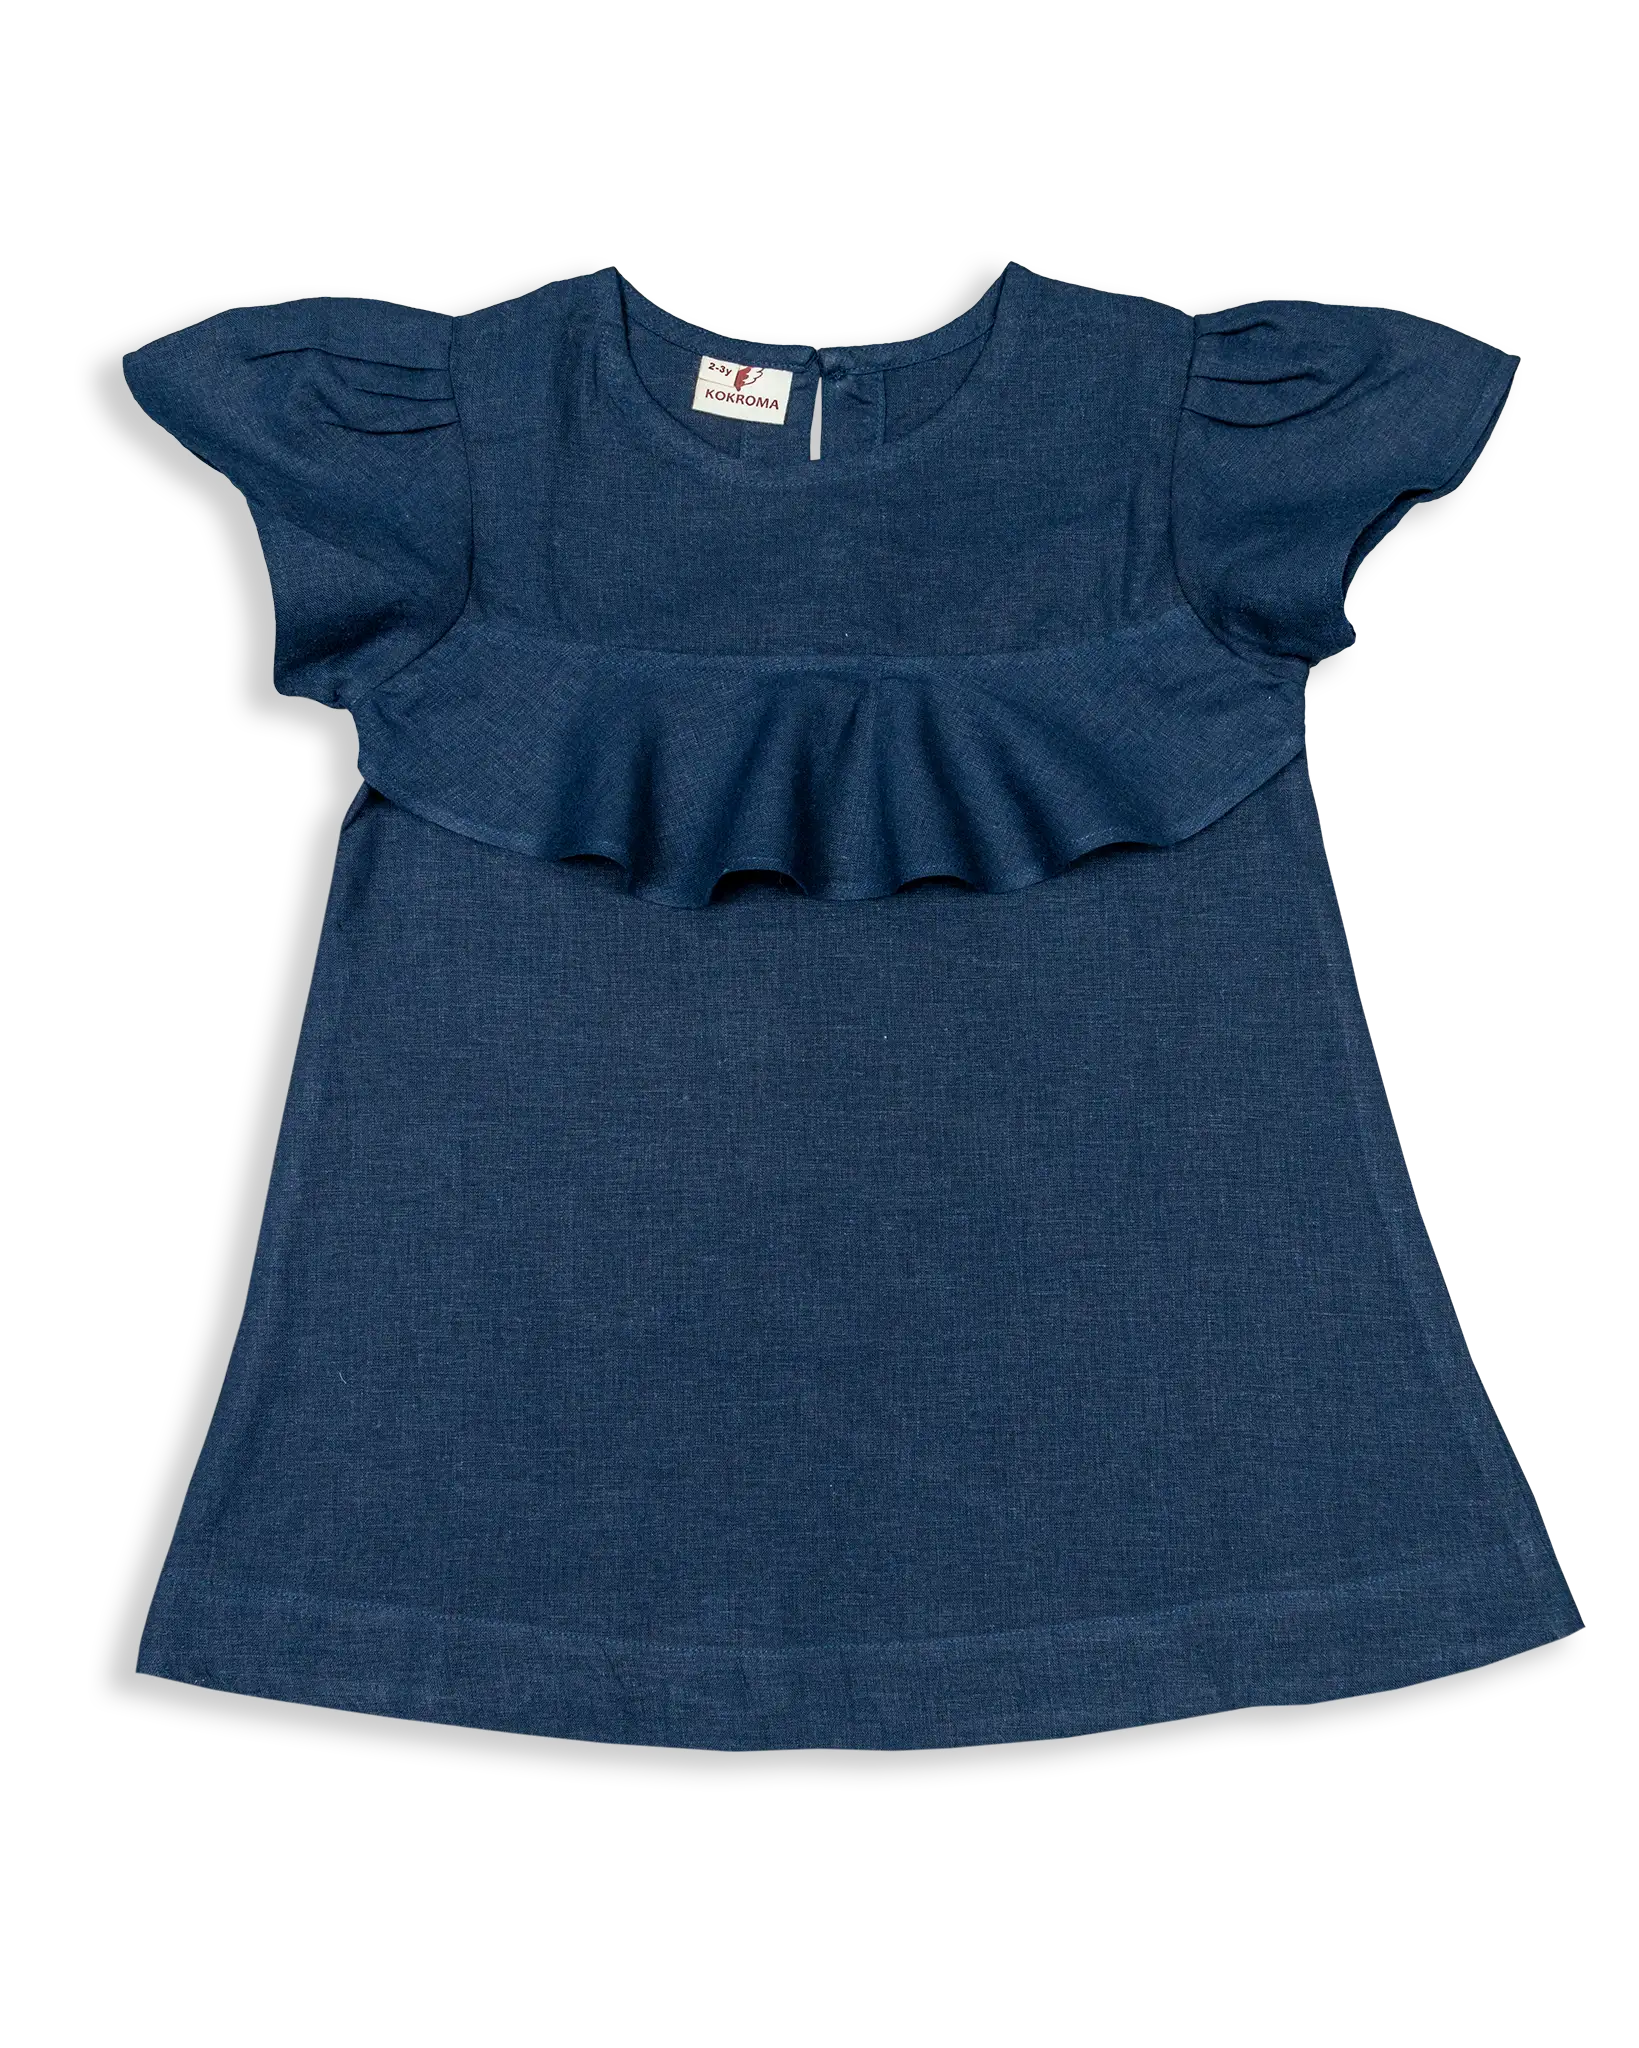 Let your kids look their best this summer with Linen Kids Dress! Made of 100% pure and breathable linen, these light-weight dresses will keep them cool and comfortable while they shine in the sun. Perfect for any occasion, each dress is handmade with love in Nepal.